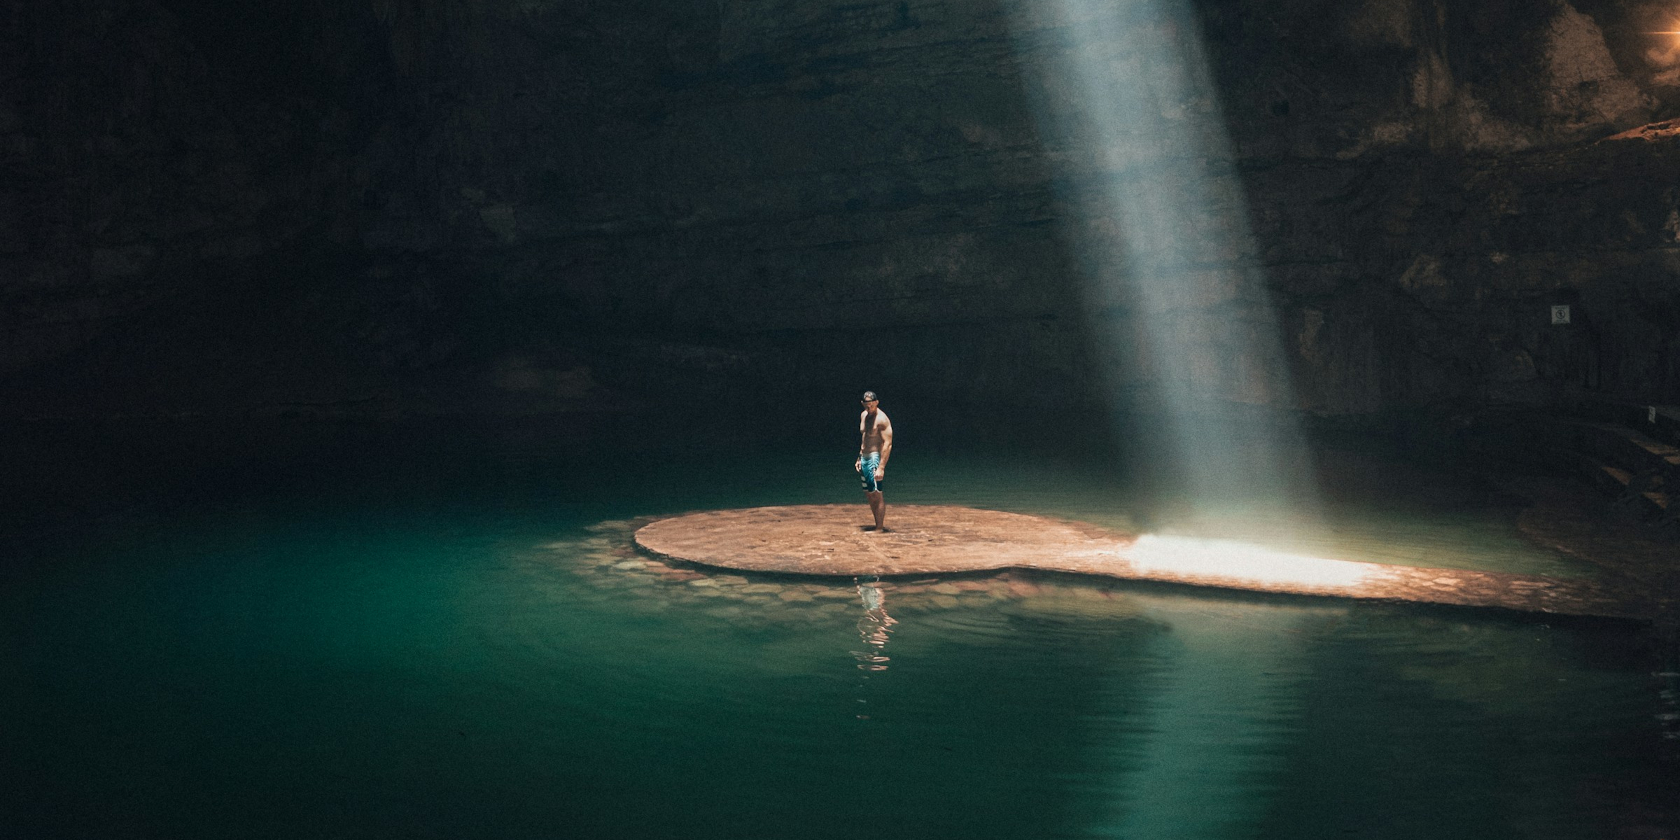 Man standing on a small island in an underground cave. A shaft of sunlight illuminates the sand behind him